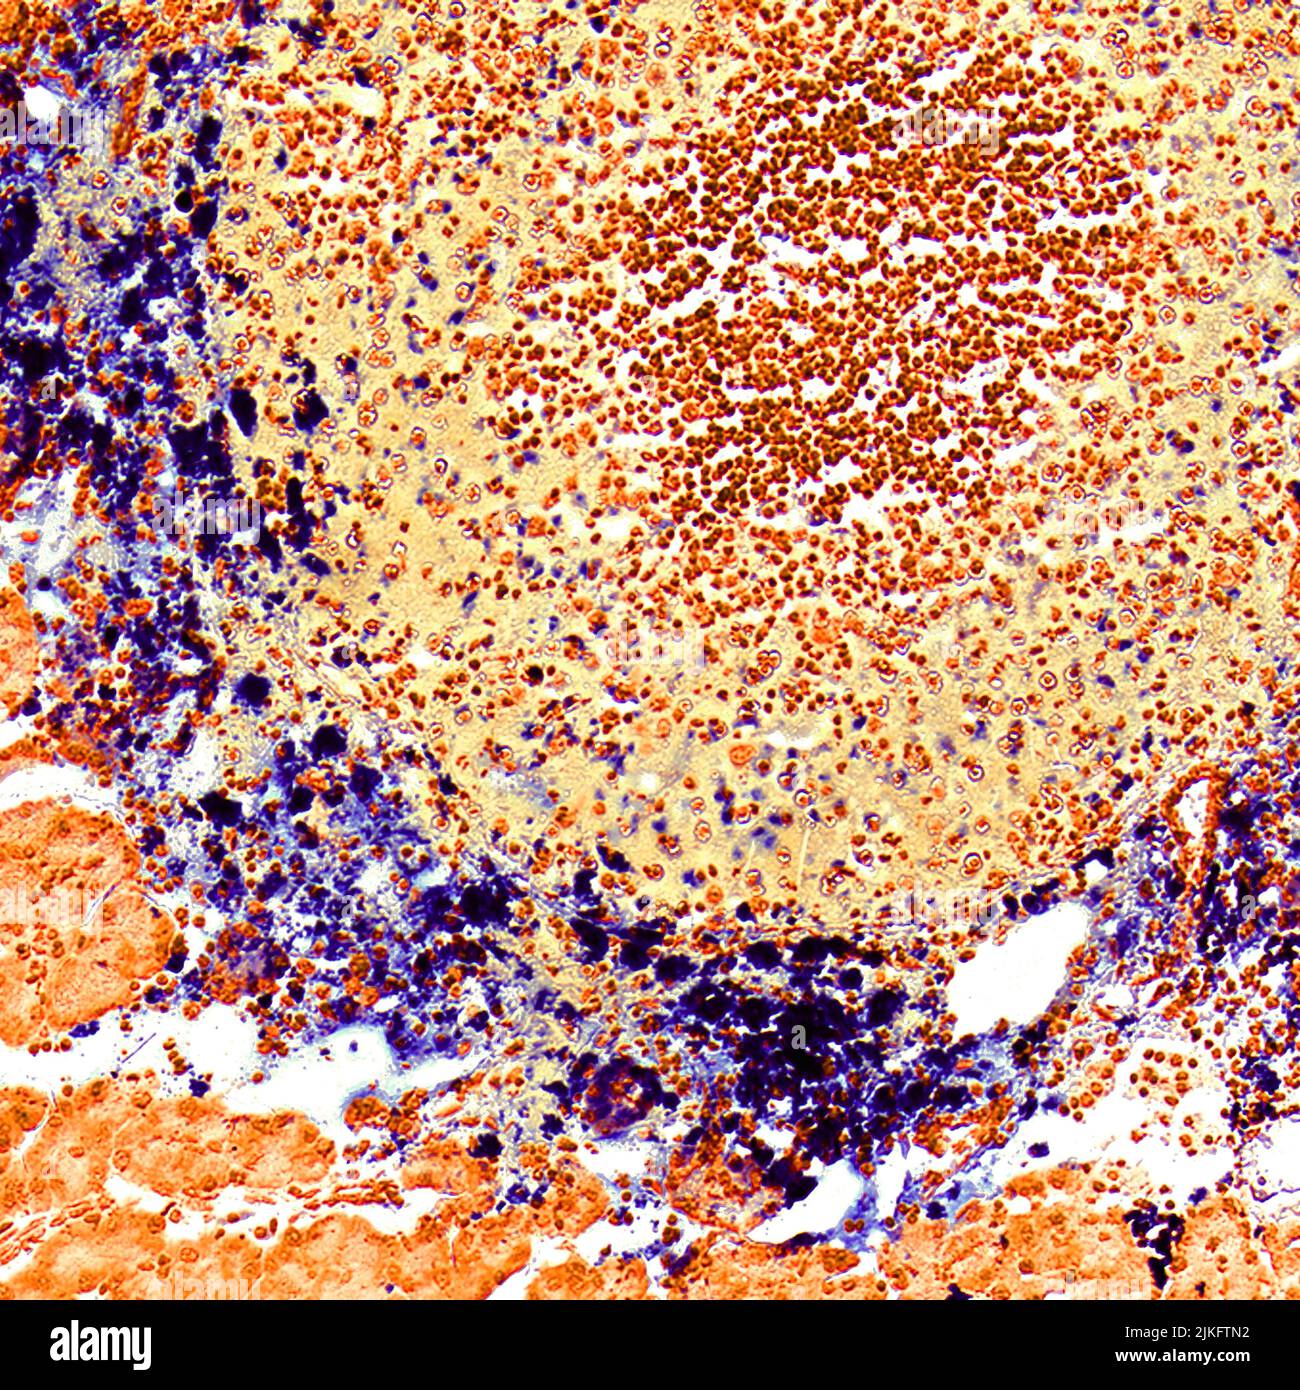 Investigators in the Cancer Nanotechnology Platform Partnership (CNPP) at Emory University have developed tumor-targeting magnetic iron oxide nanoparticles for image-guided pancreatic cancer therapy. The nanoparticles deliver therapeutic agents into pancreatic cancer tumors and produce signals that can be tracked by magnetic resonance imaging (MRI). This microscopy image of a tumor section (obtained from a mouse tumor model) shows the blue-stained nanoparticles selectively accumulating in the peripheral tumor area and then penetrating into tumor cells. Stock Photo